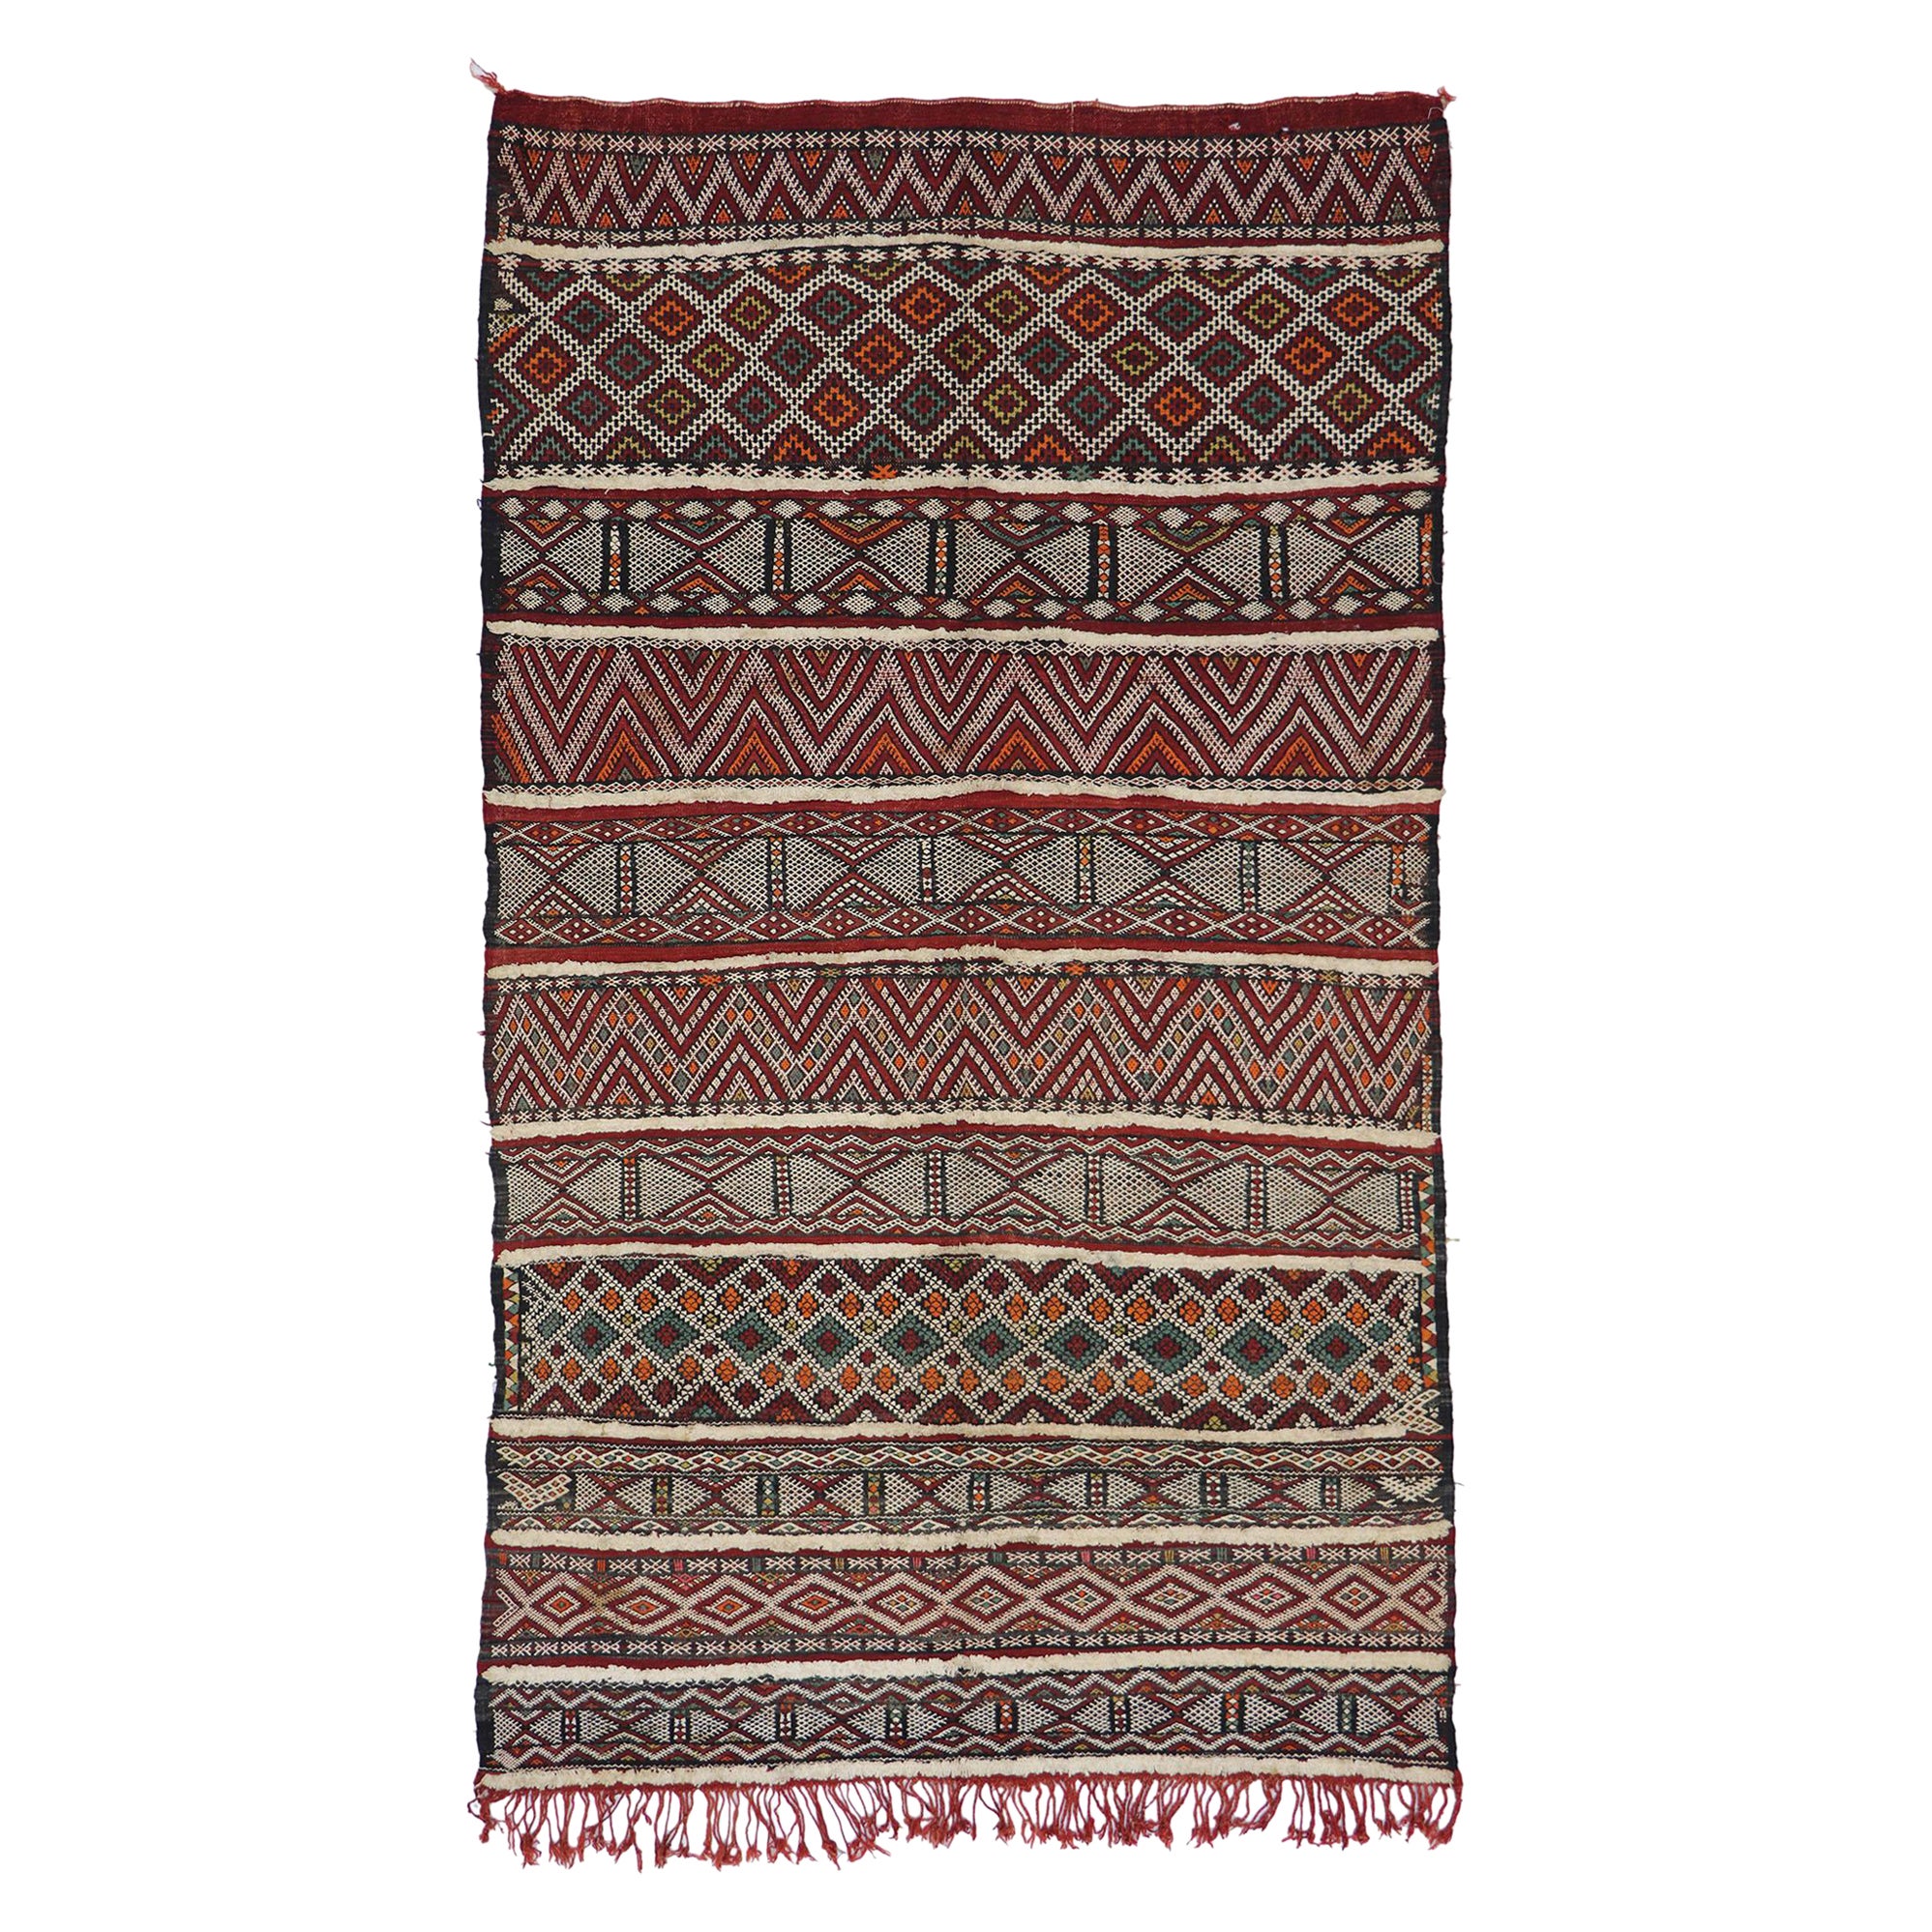 Vintage Zemmour Moroccan Kilim Rug with Tribal Style